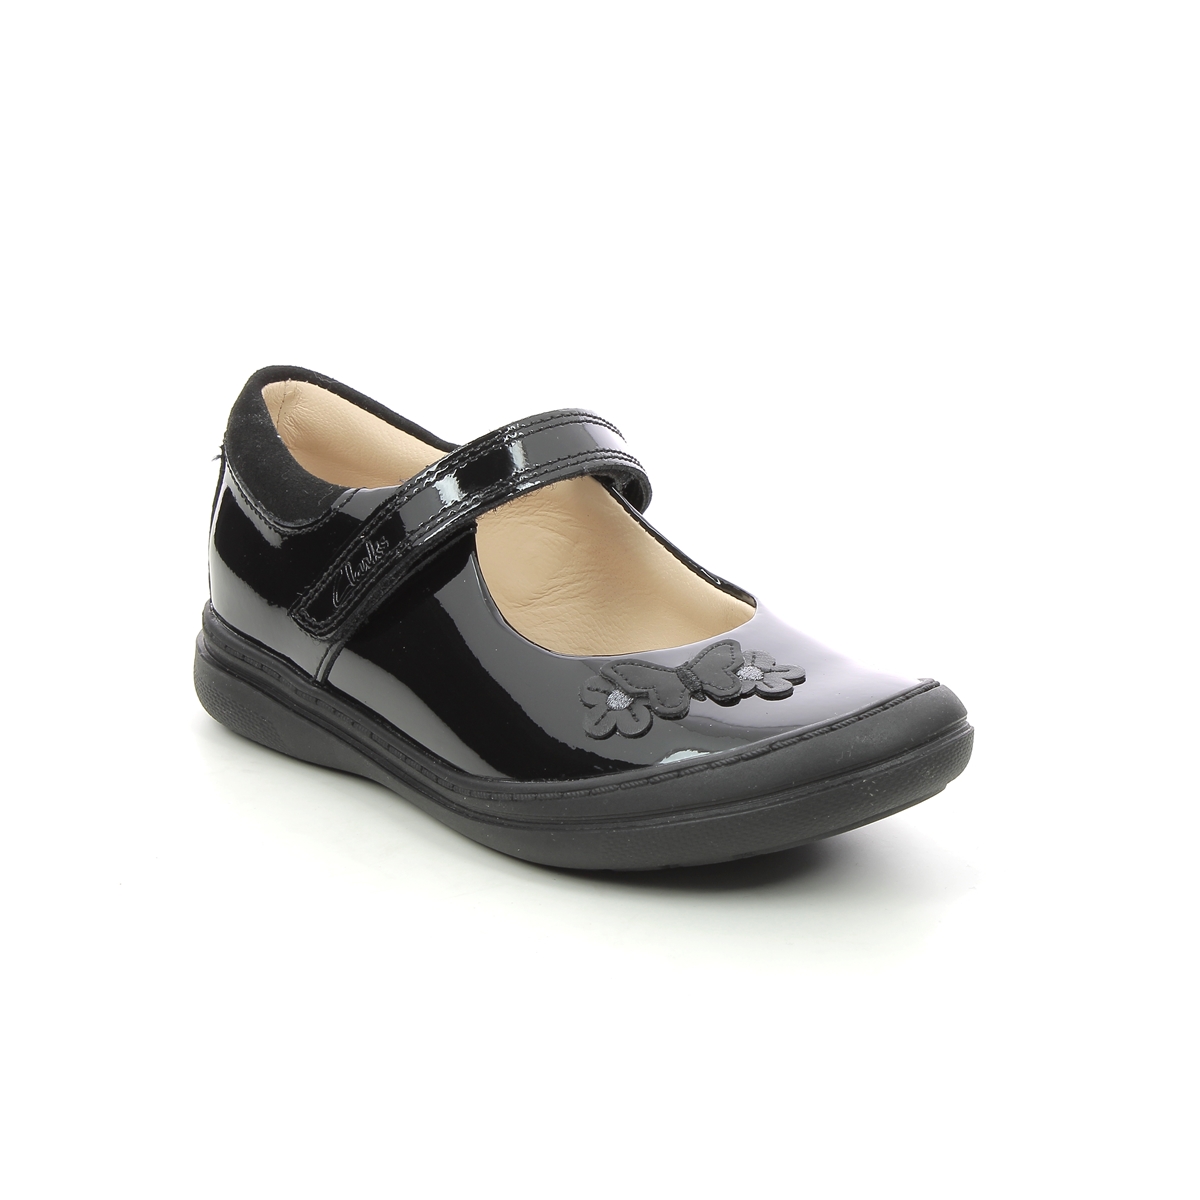 Clarks Scooter Daisy T Black patent Kids Girls Casual Shoes 6173-16F in a Plain Leather in Size 7.5